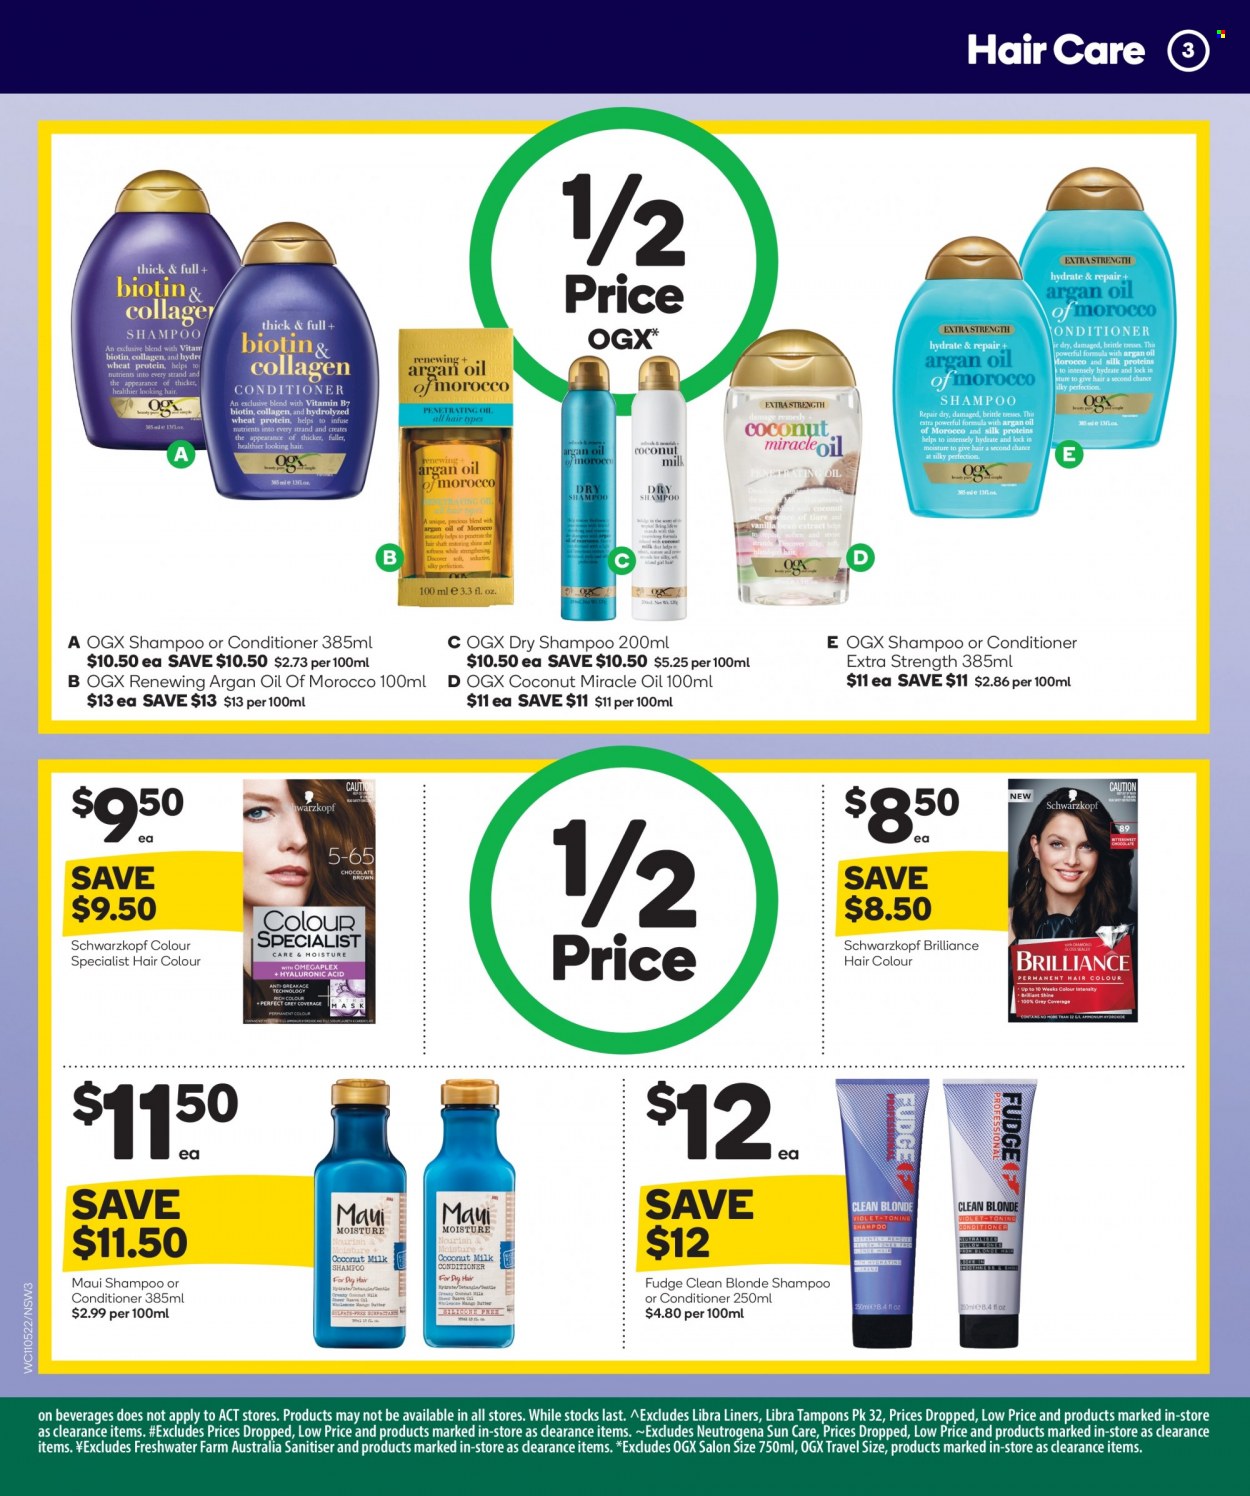 thumbnail - Woolworths Catalogue - 11 May 2022 - 17 May 2022 - Sales products - fudge, shampoo, Schwarzkopf, tampons, Neutrogena, OGX, conditioner, hair color, argan oil. Page 4.